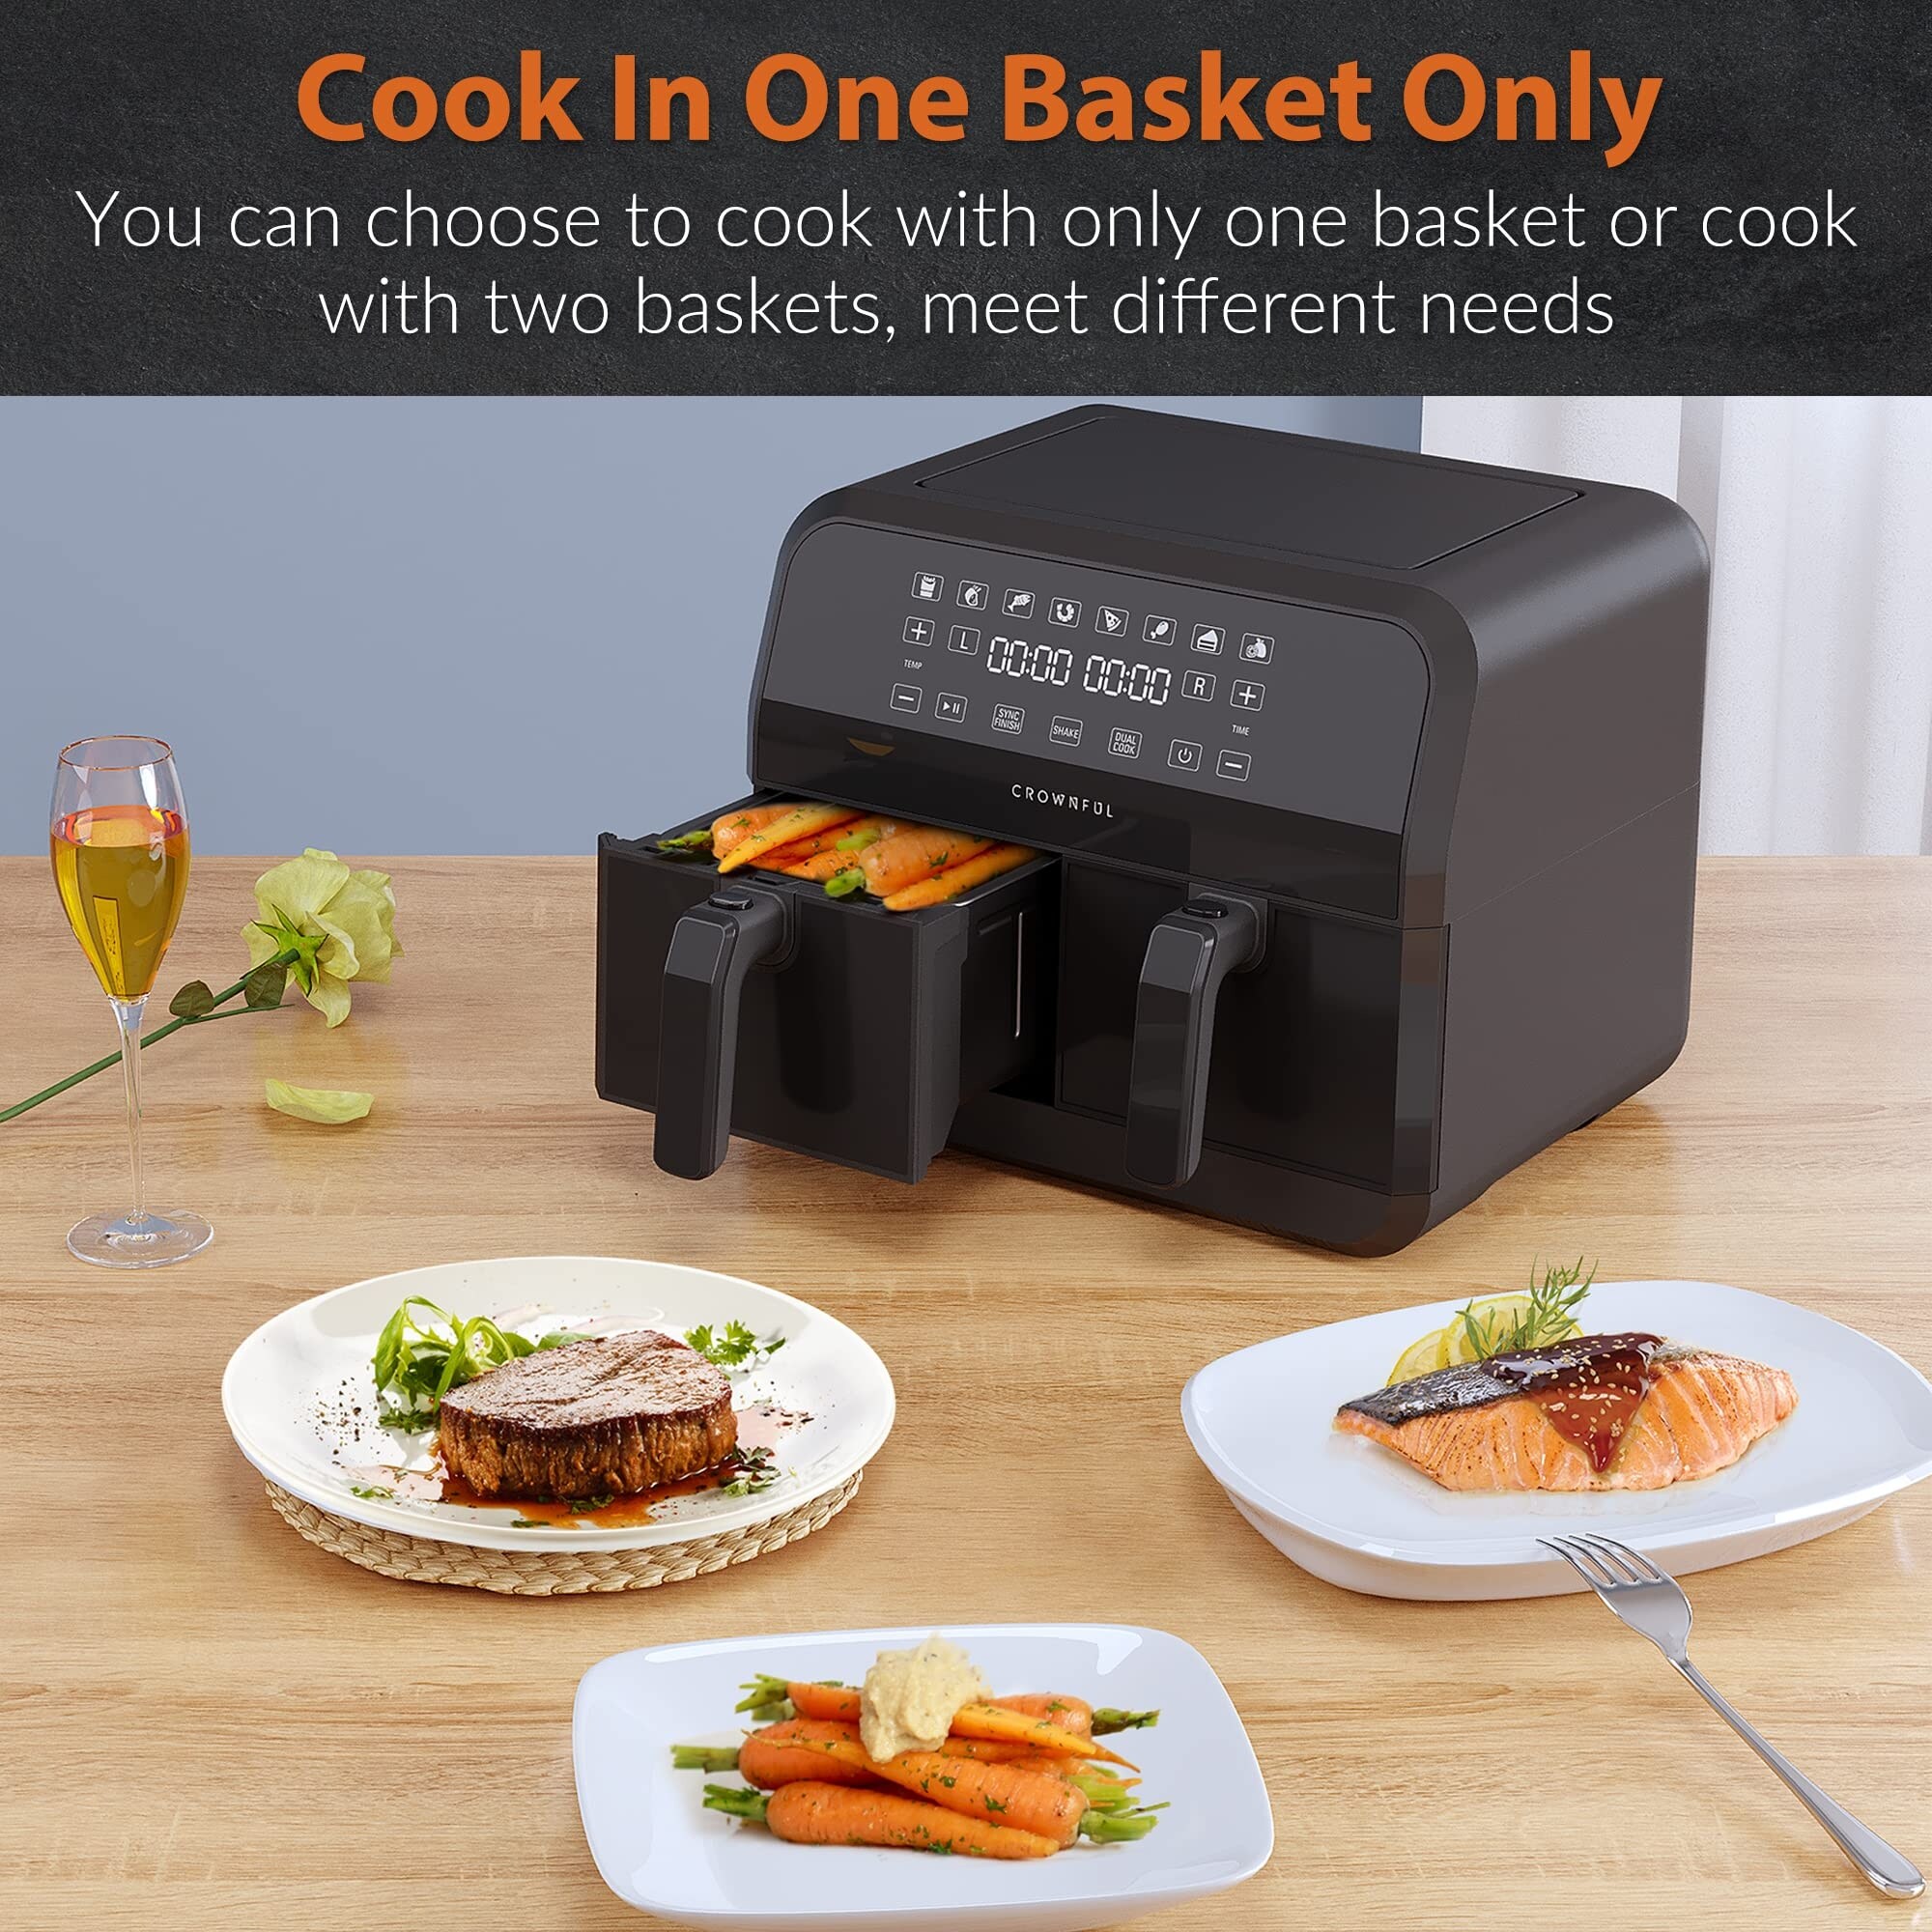 https://ak1.ostkcdn.com/images/products/is/images/direct/d69b025eea984fbc81c5508c9f4a39c967e98baf/8-Qt-Air-Fryer%2C-Dual-Basket-with-Temperature-Control-%2850%2B-Recipes%29%2C-Dual-Cook%2C-Sync-Finish-and-Shake-Reminder-Function%2C-1700W.jpg